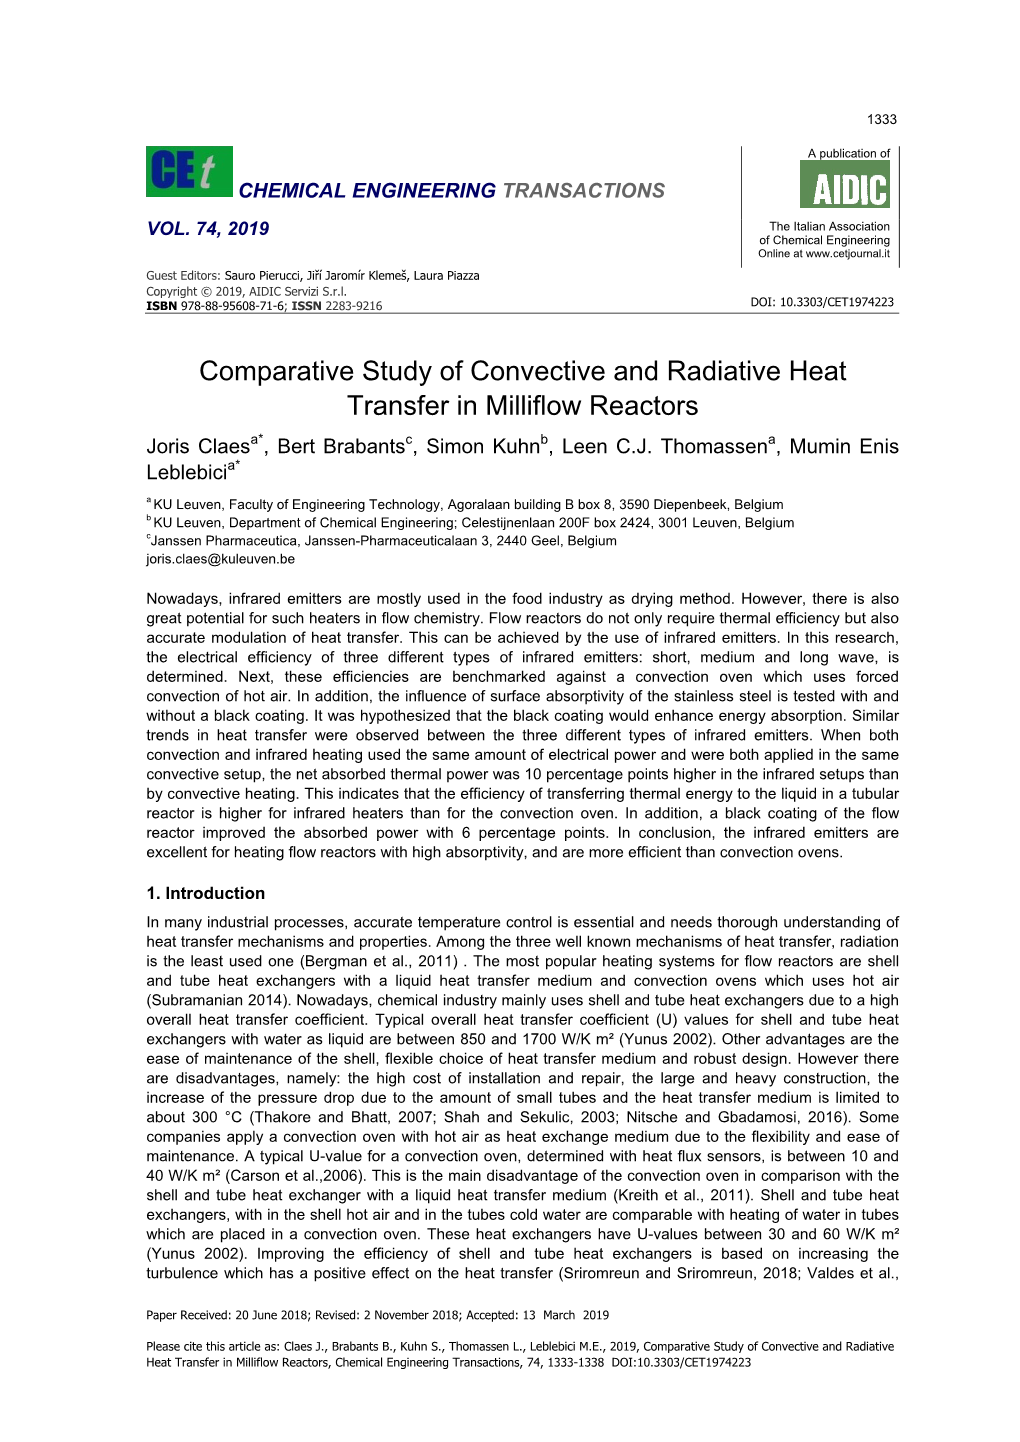 Comparative Study of Convective and Radiative Heat Transfer in Milliflow Reactors, Chemical Engineering Transactions, 74, 1333-1338 DOI:10.3303/CET1974223 1334